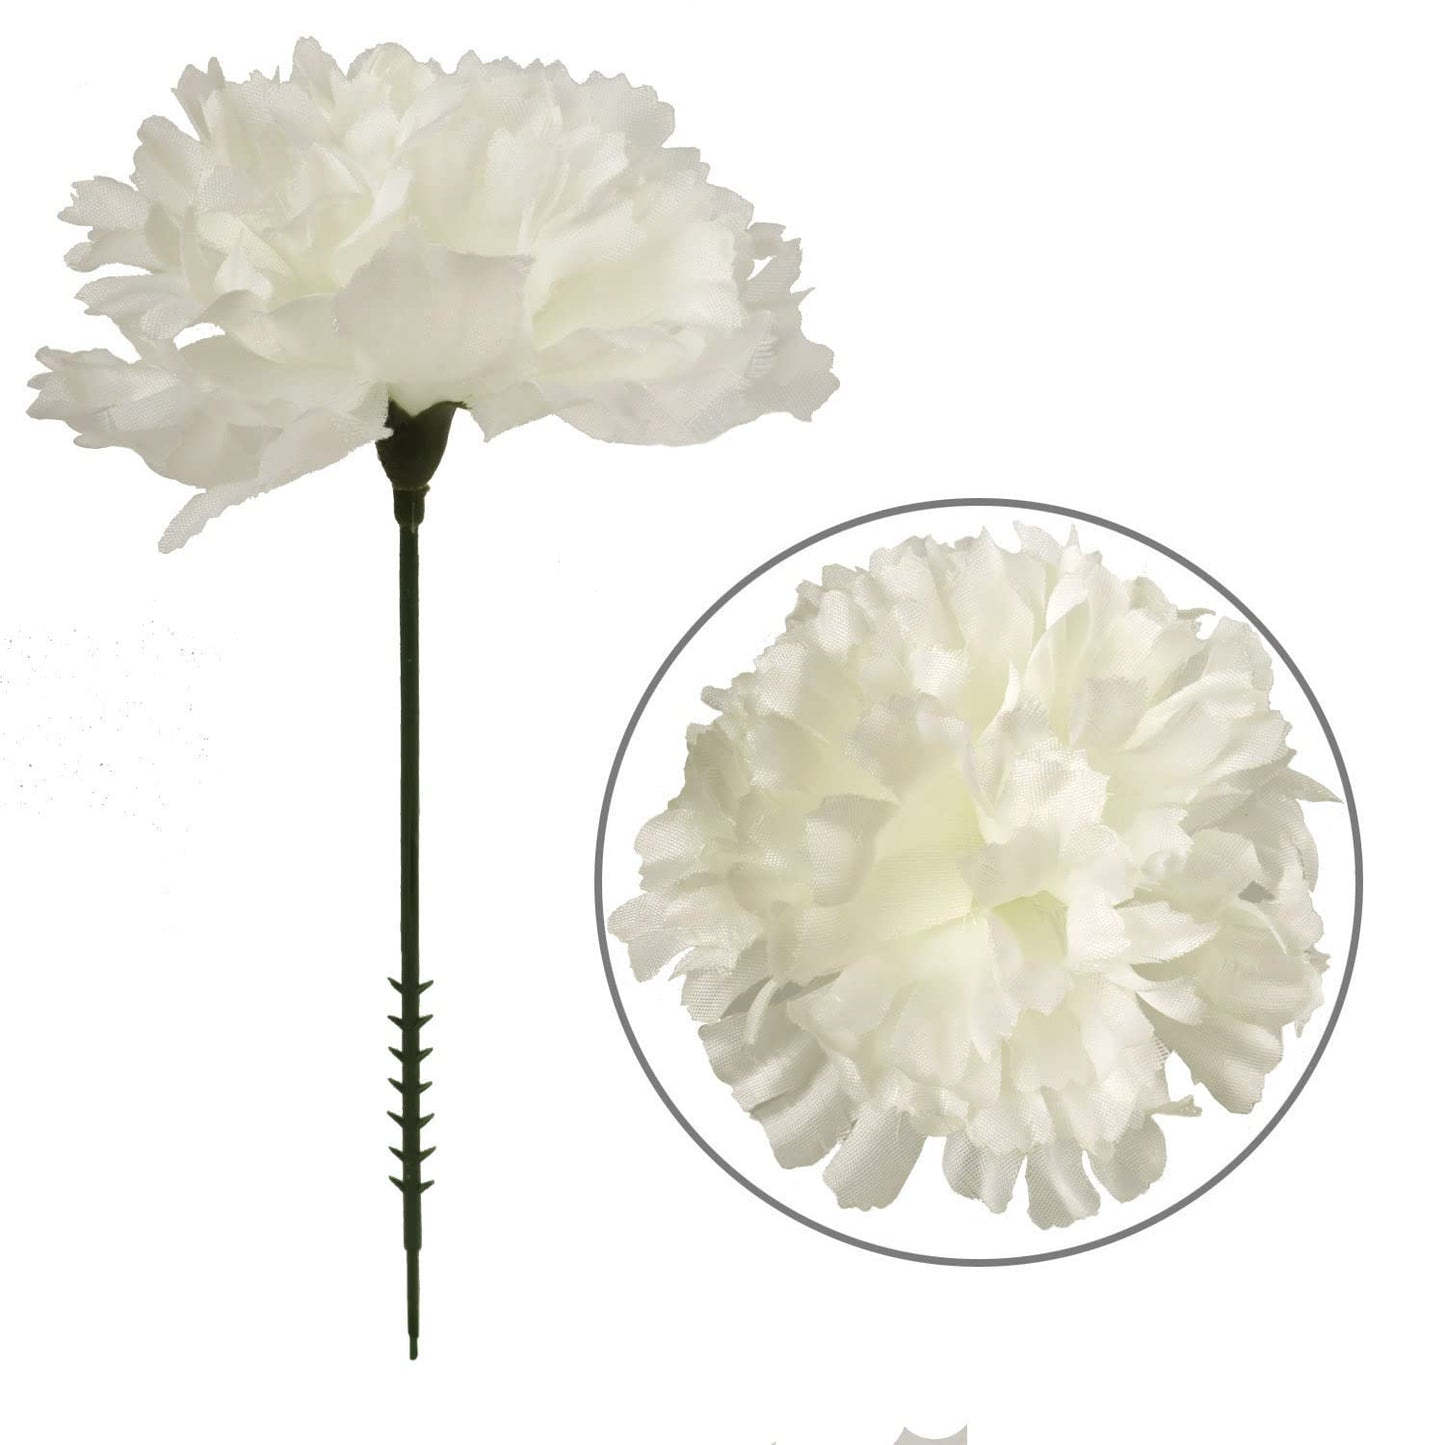 Lifelike 3.5"Diam Carnations - Perfect for DIY Weddings, Centerpieces, Parties; Elevate Your Space with Stunning Silk Flowers